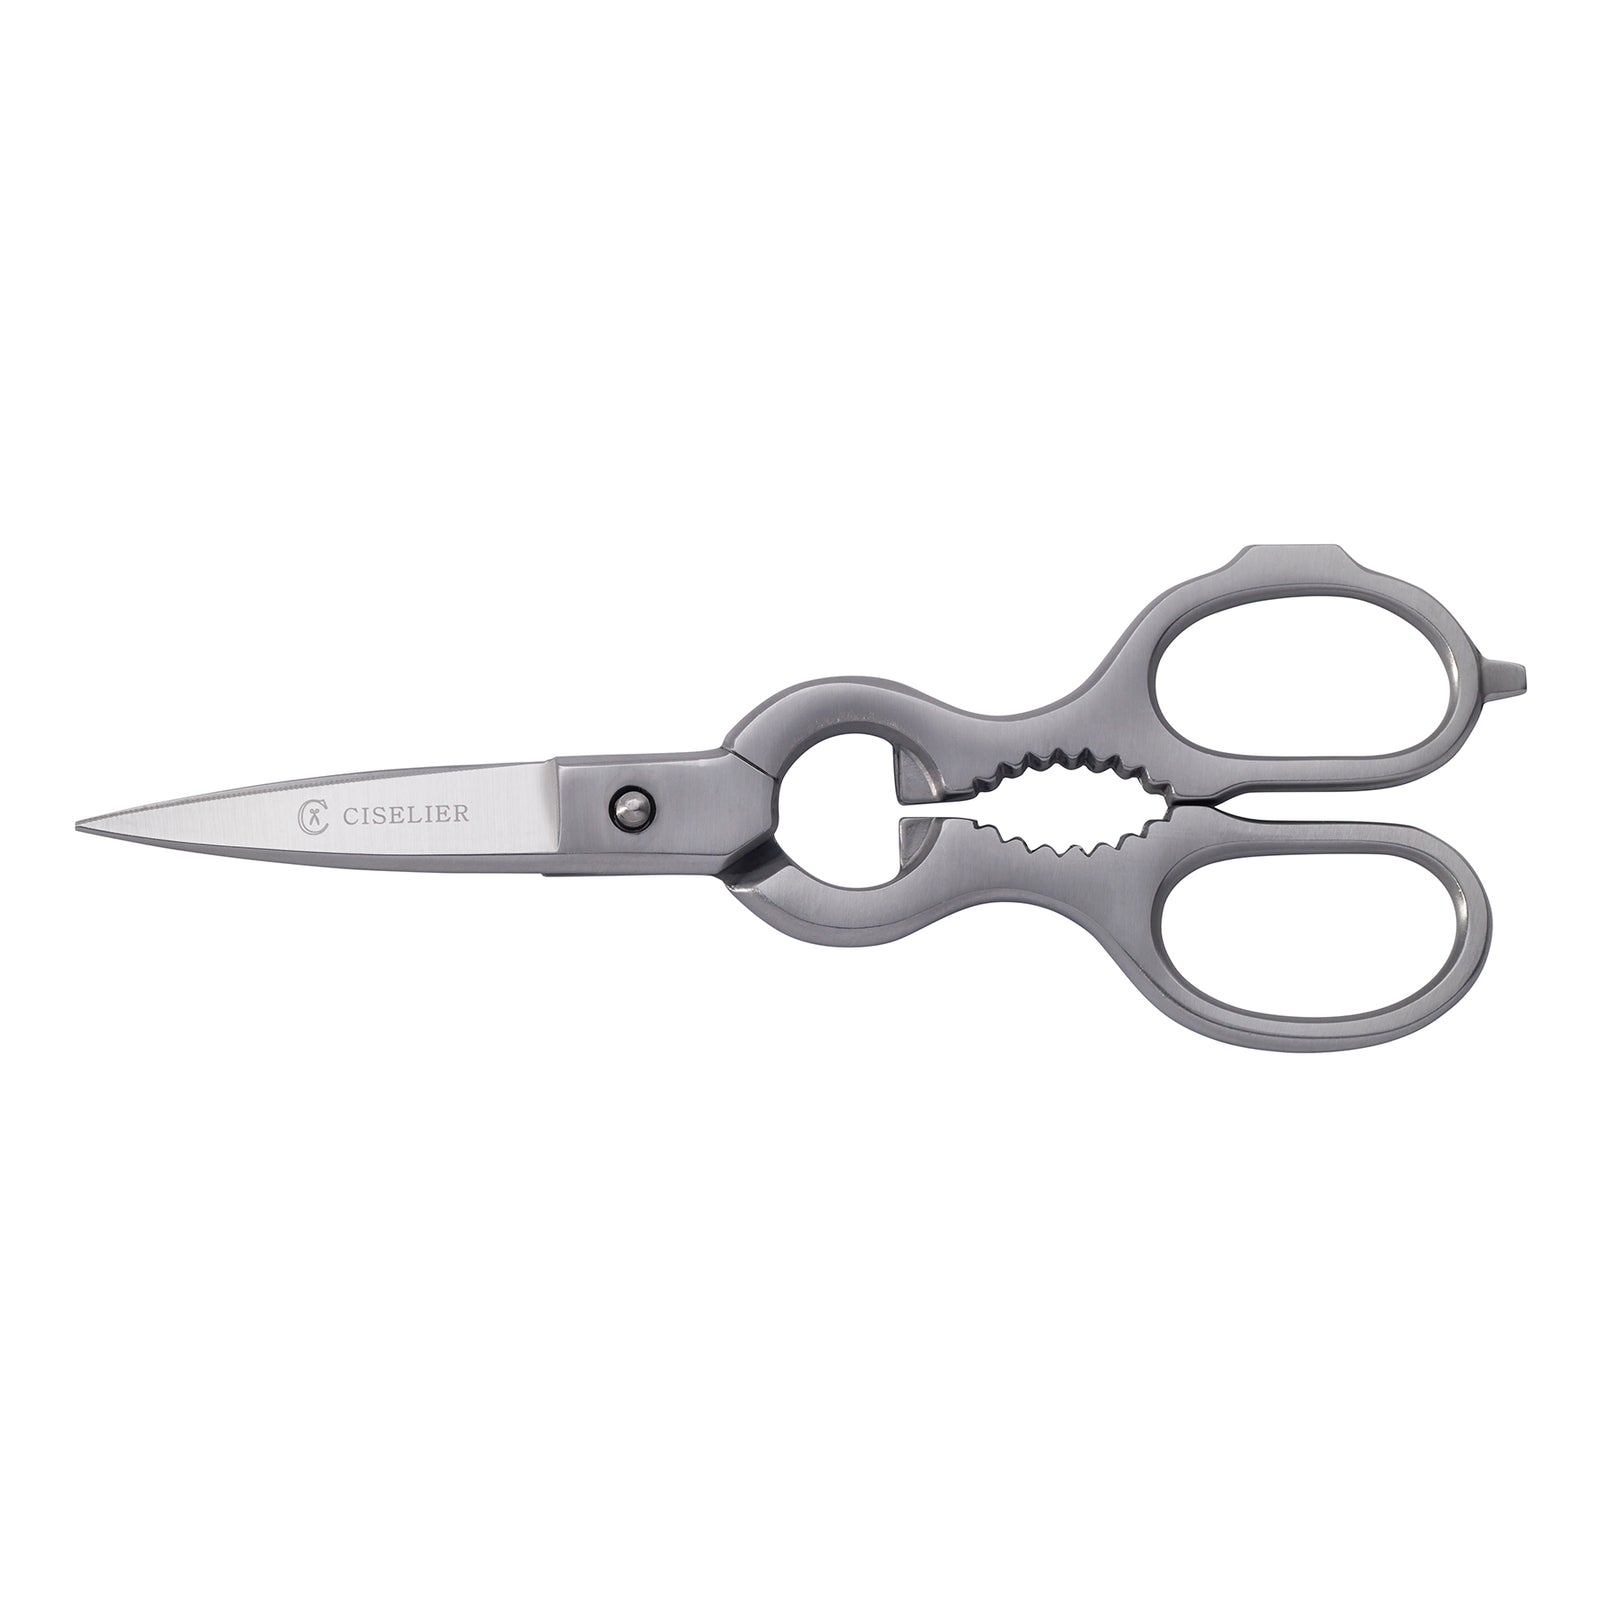 Come Apart Kitchen Scissors - Great Shears for Meat